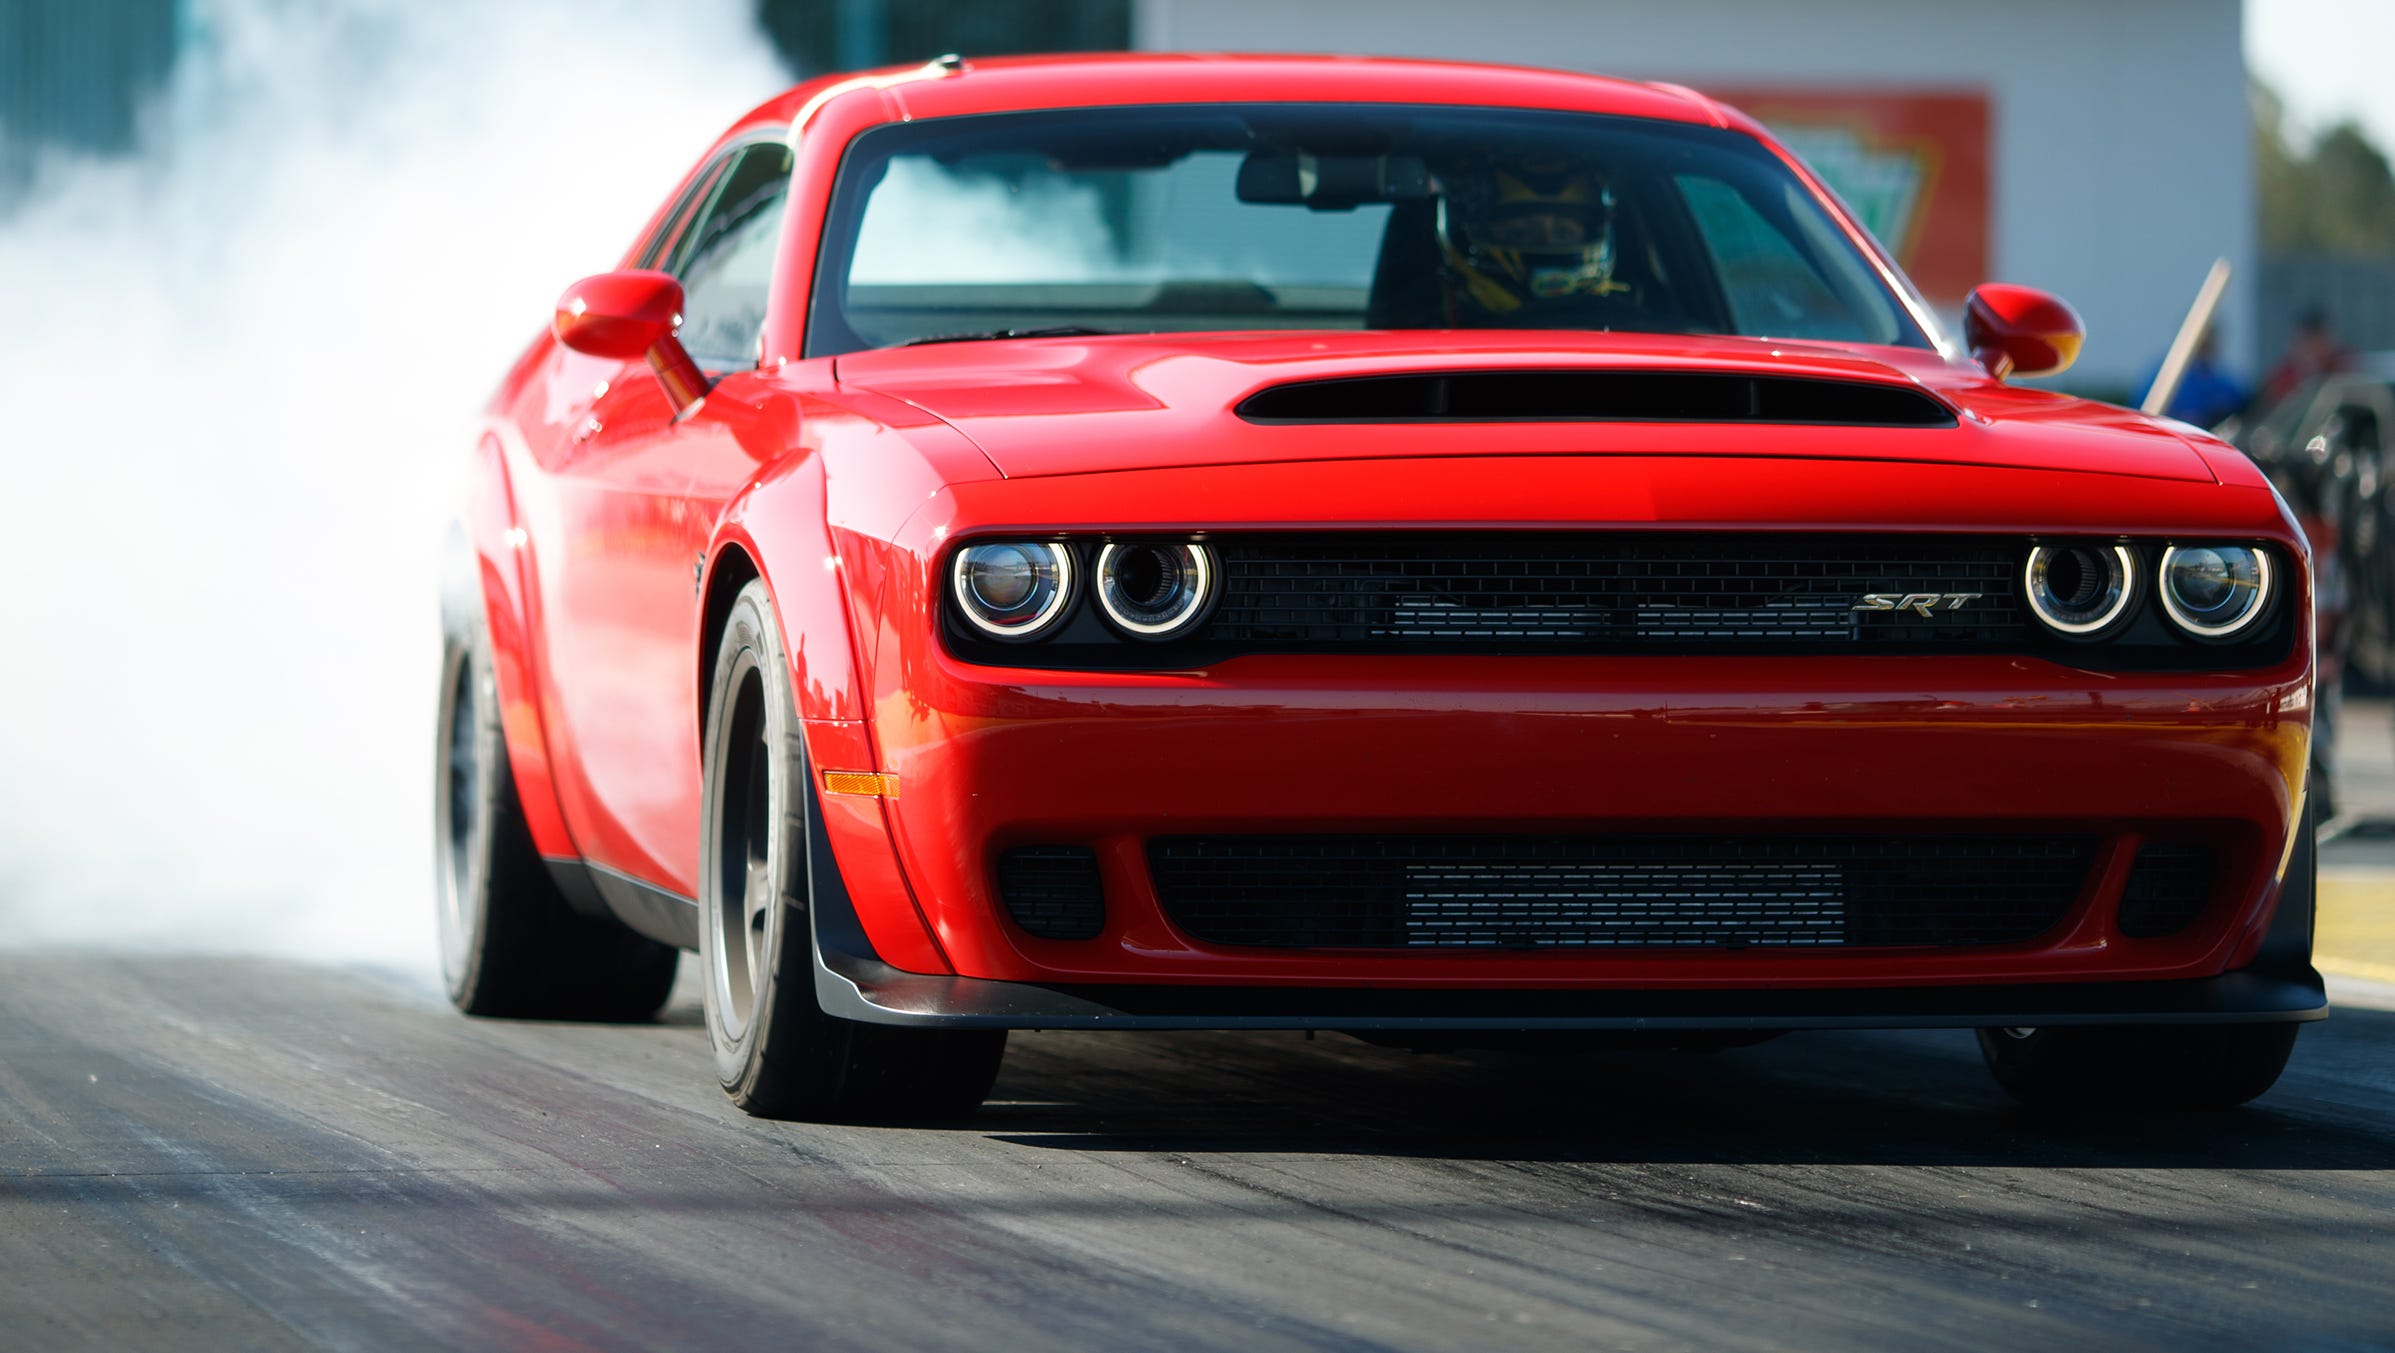 Dodge Demon 840-horsepower car is a slice of muscle-car